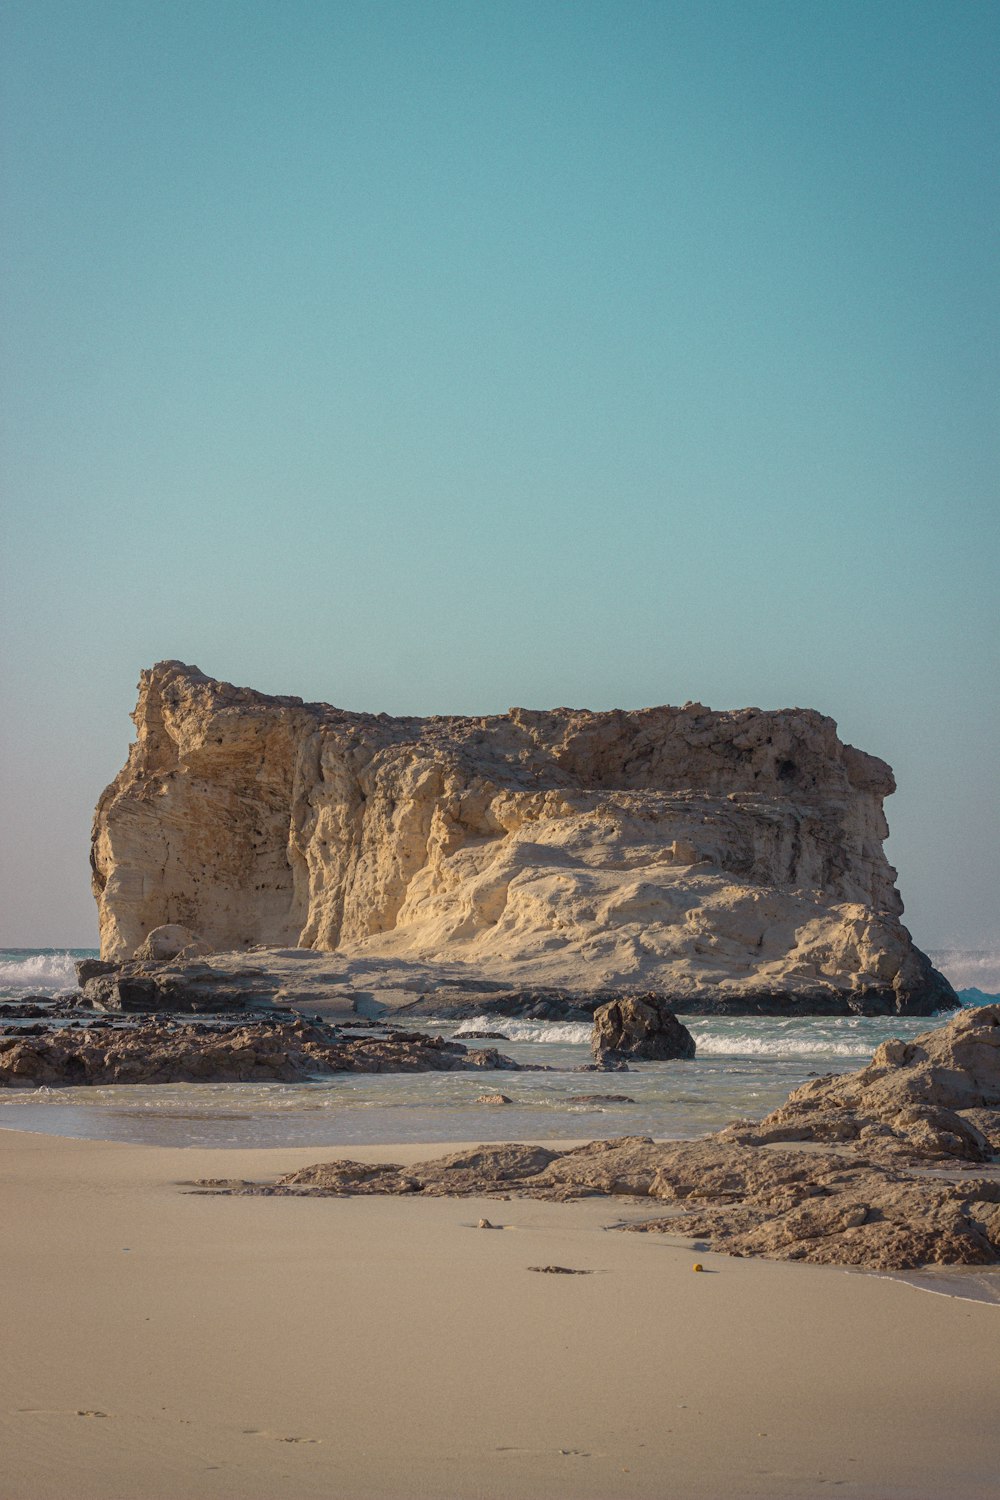 a large rock outcropping on a beach next to the ocean